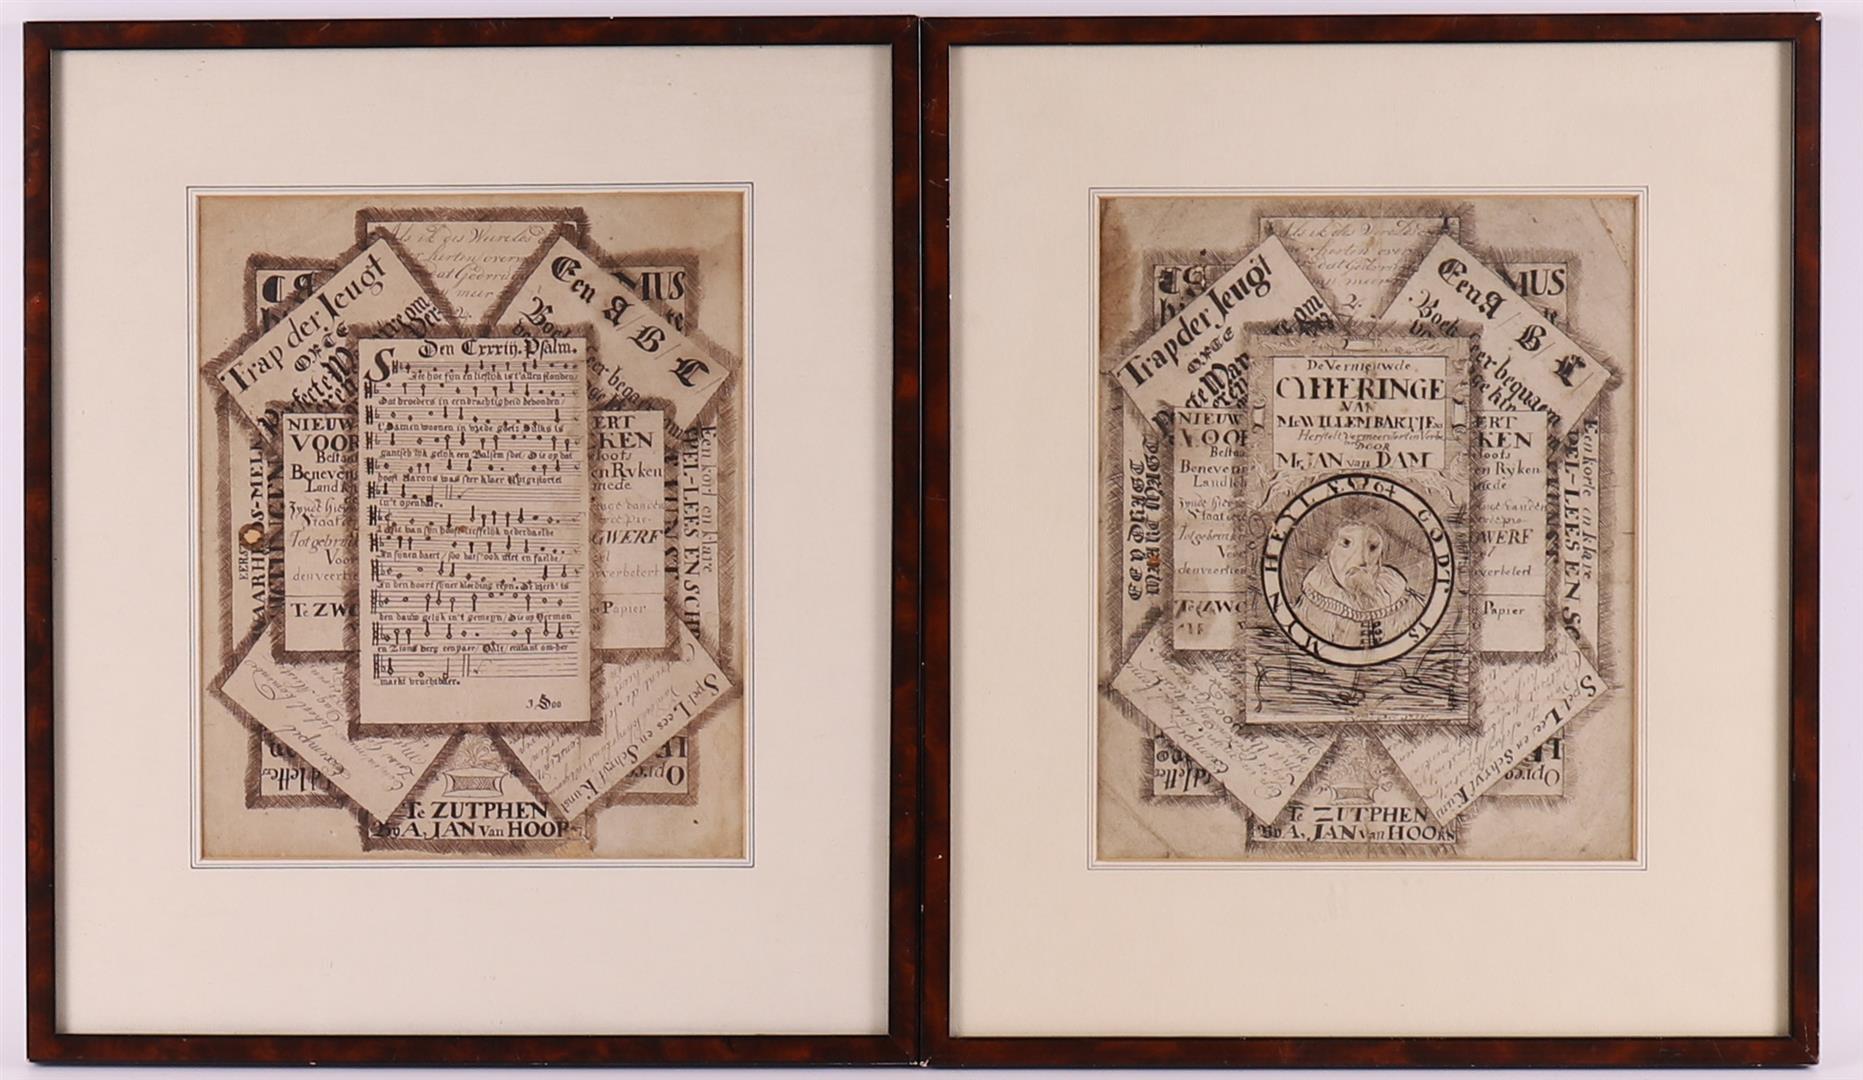 Two signed trompe l'oeuil book pages, 18th century.